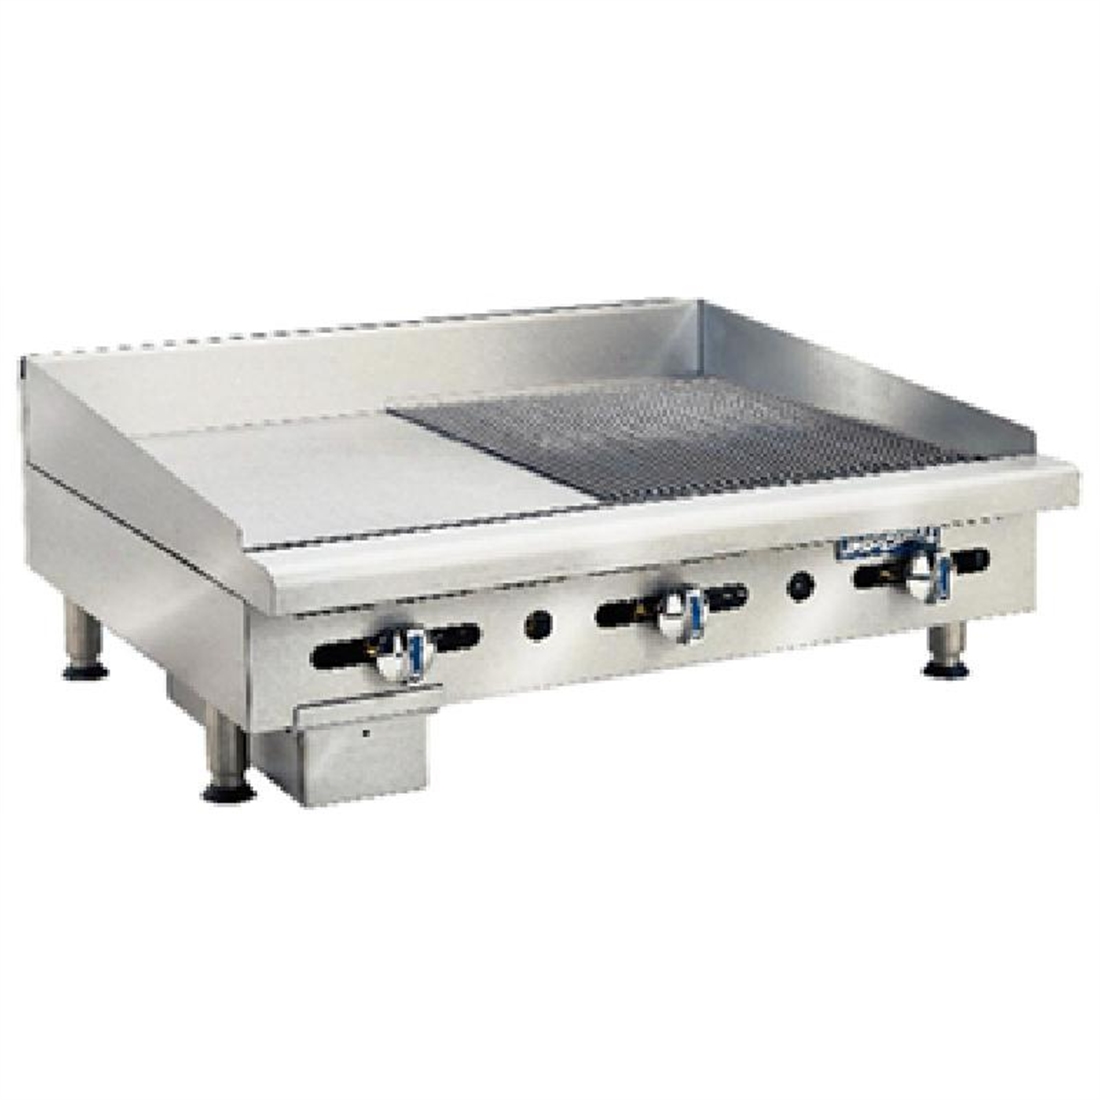 Imperial Thermostatic Ribbed and Smooth Propane Gas Griddle ITG-18-GG18